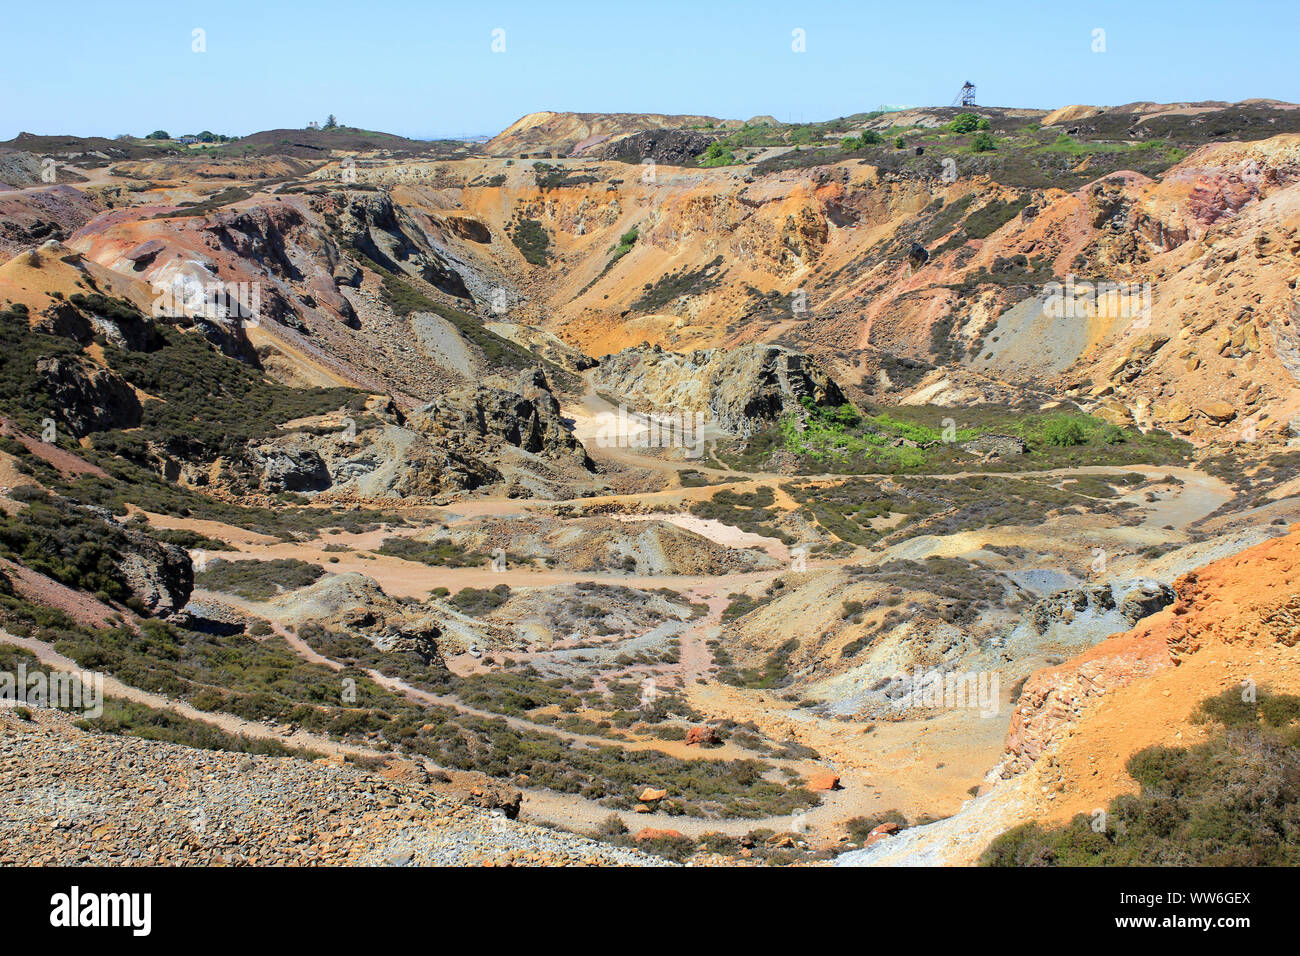 Copper Mine at Parys Mountain (Mynydd Parys) on the Isle of Anglesey, Wales, UK Stock Photo